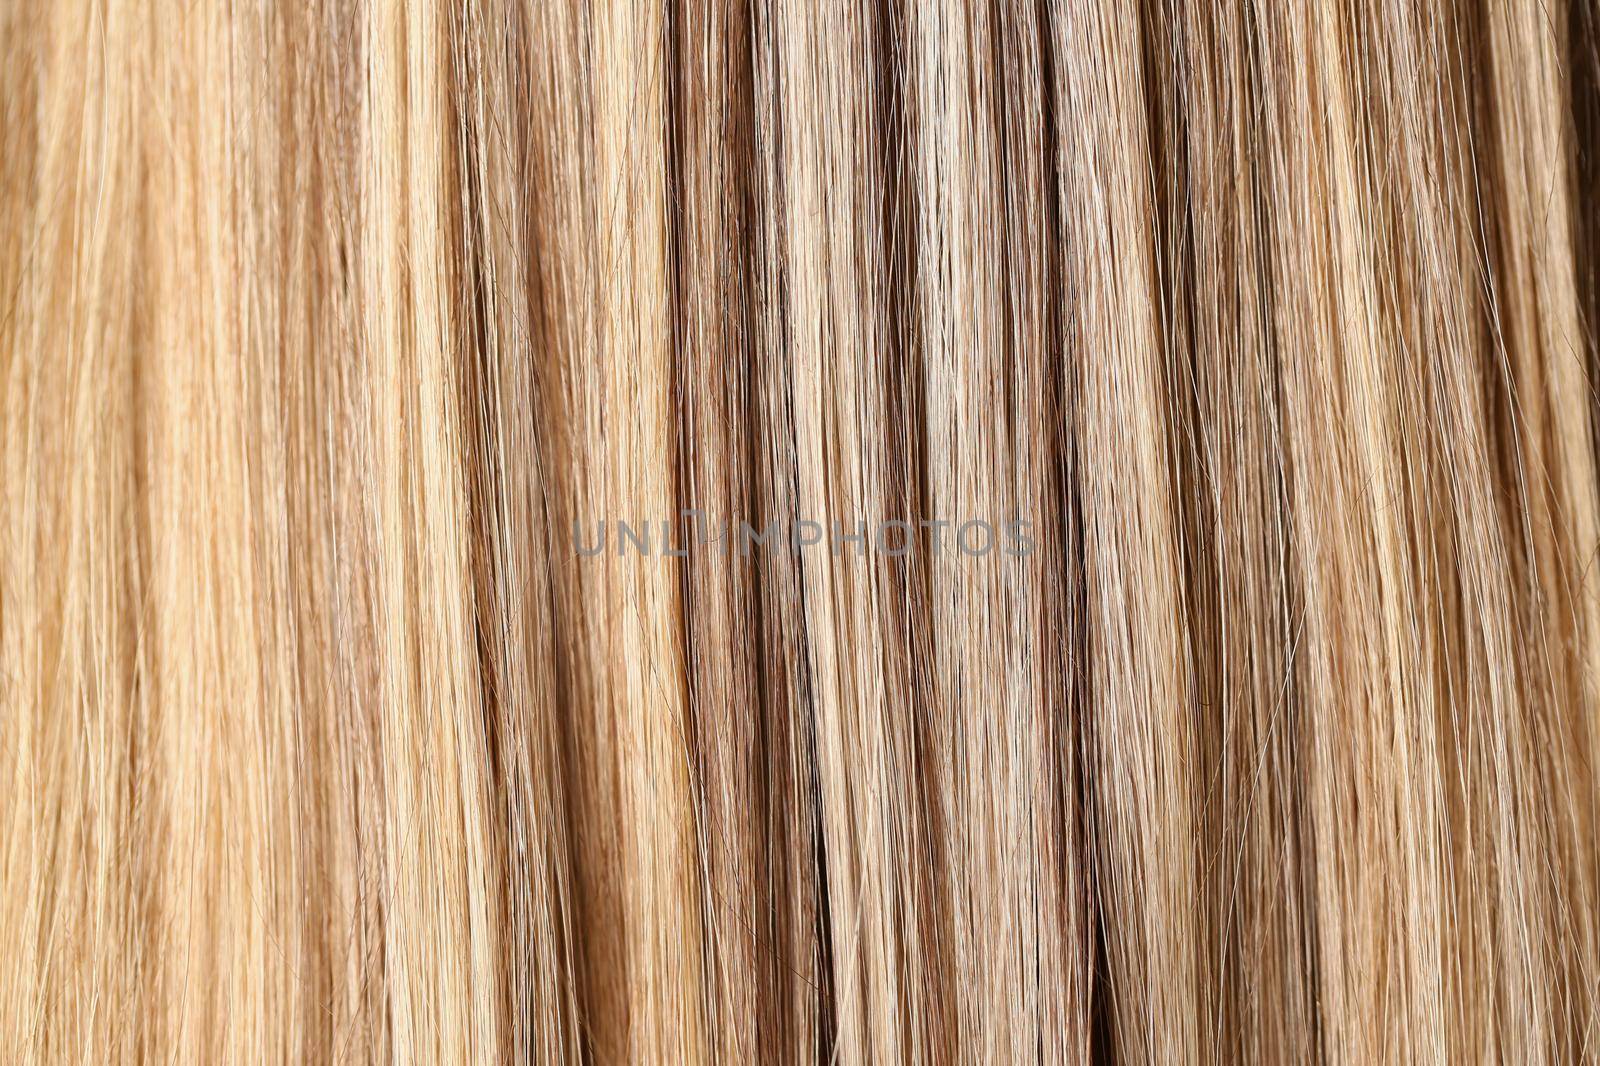 Close-up of female hair after highlighting procedure in beauty salon, shiny shades of blonde hairstyle, hair treatment. Hairstyle, wellness, care concept